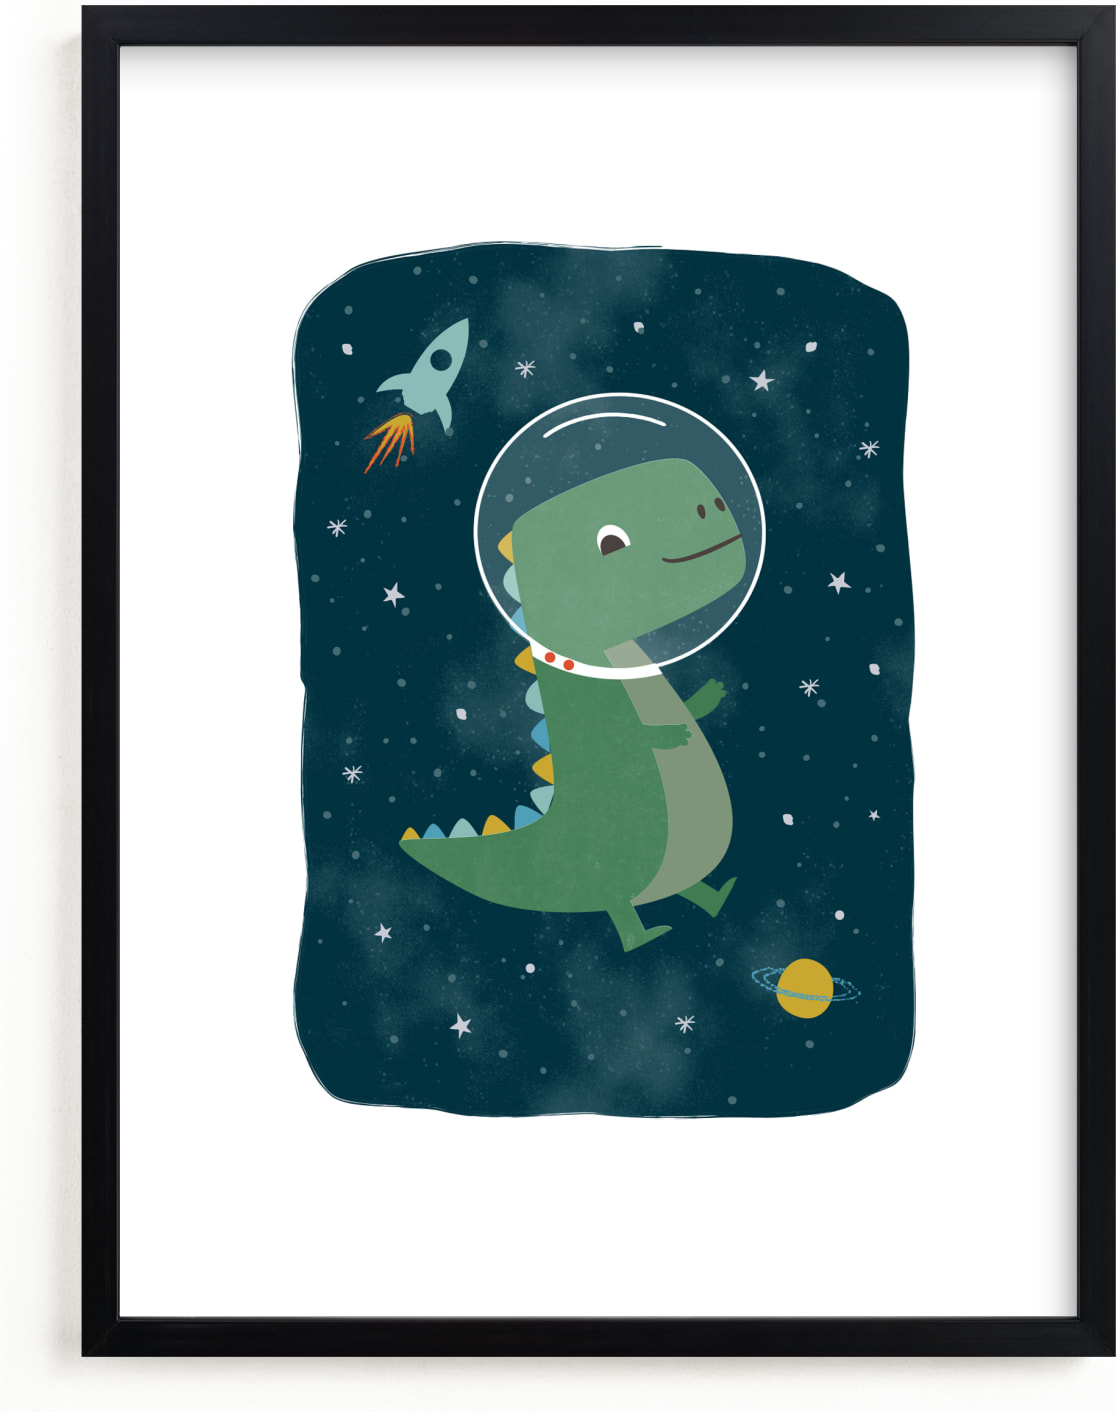 This is a colorful art by Annie Holmquist called Dinos in space.